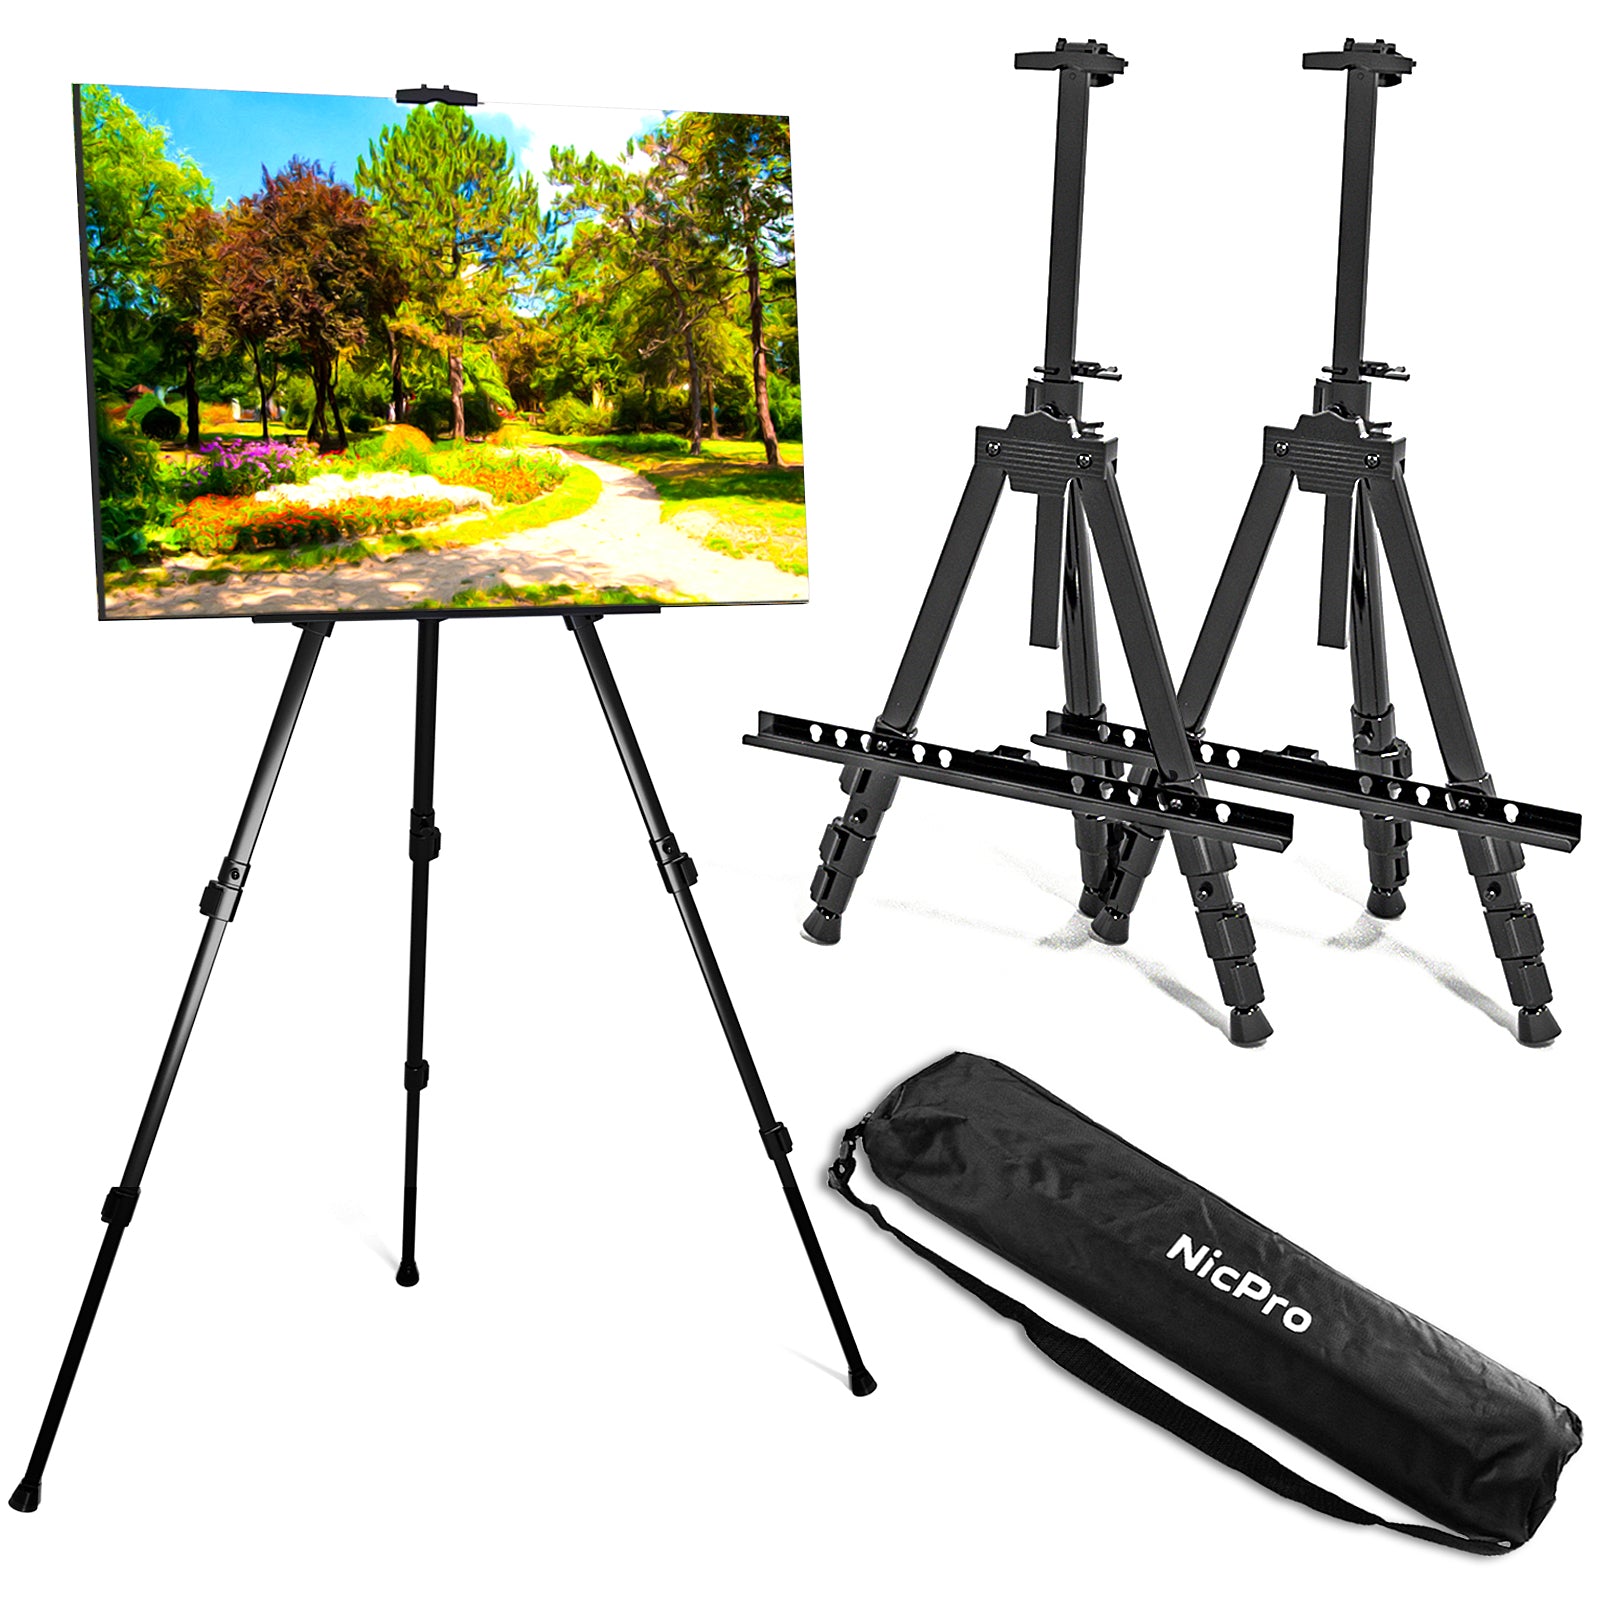 Nicpro 2 Pack Artist Easel Stand, Adjustable Height 17 to 63 Aluminu